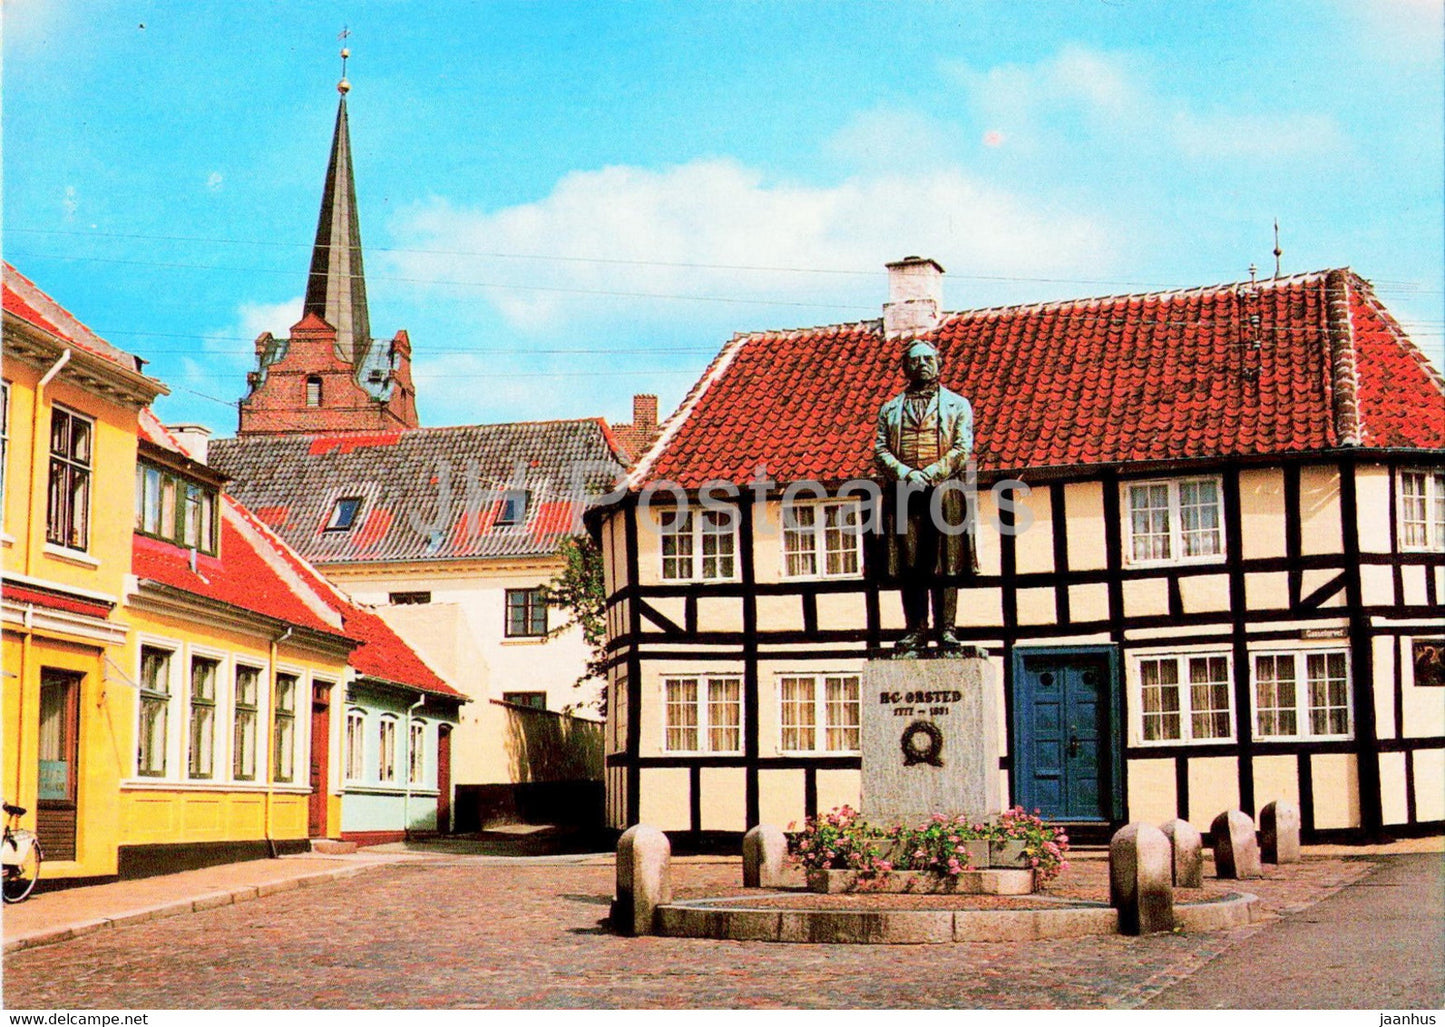 Rudkobing - The square with the statue of H C Orsted - monument - Denmark - unused - JH Postcards